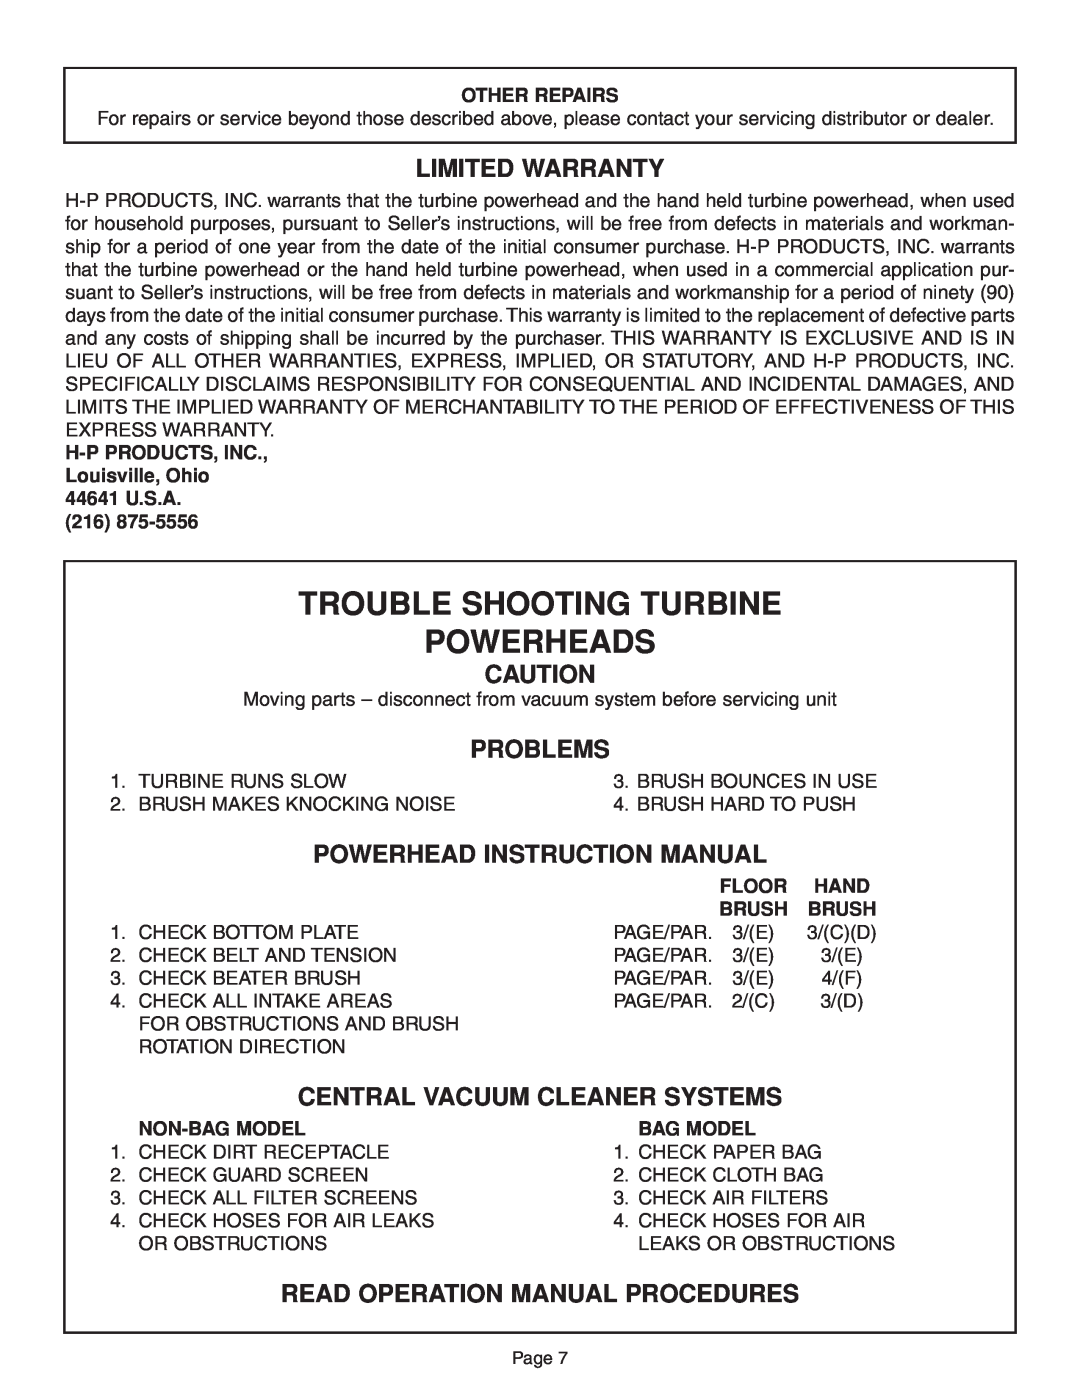 H-P Products 7161, T210 Limited Warranty, Problems, Central Vacuum Cleaner Systems, Trouble Shooting Turbine Powerheads 